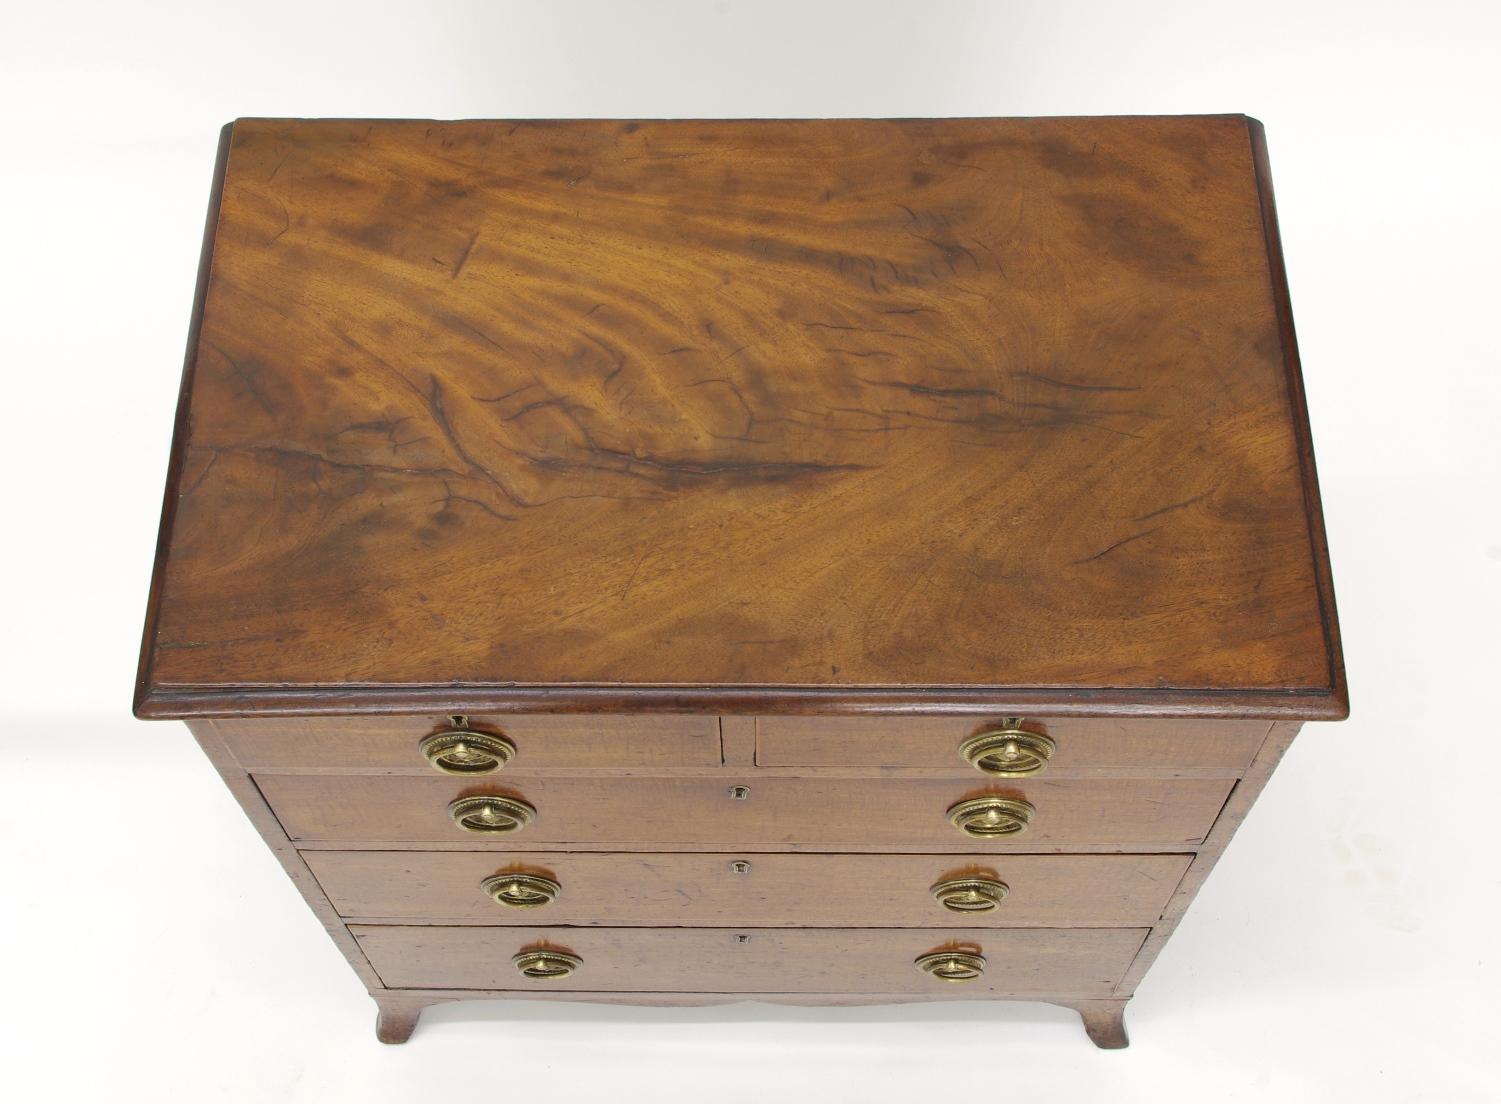 George III Fiddleback Mahogany Small Chest of Drawers, circa 1790 (Englisch)